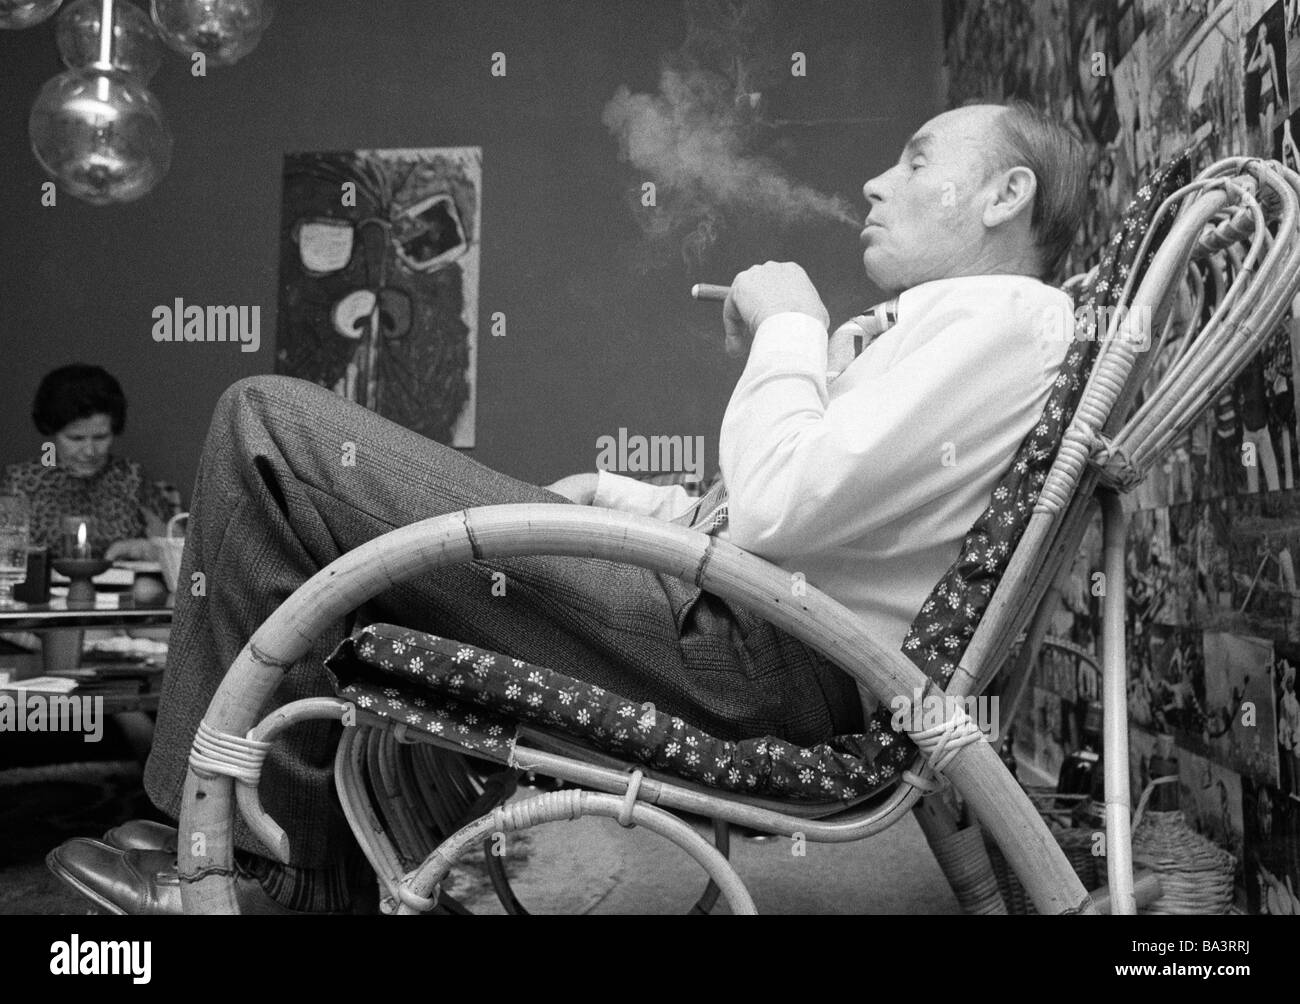 Seventies, black and white photo, people, older man sits in a rockingchair smoking a cigar, aged 60 to 70 years, Josef Stock Photo